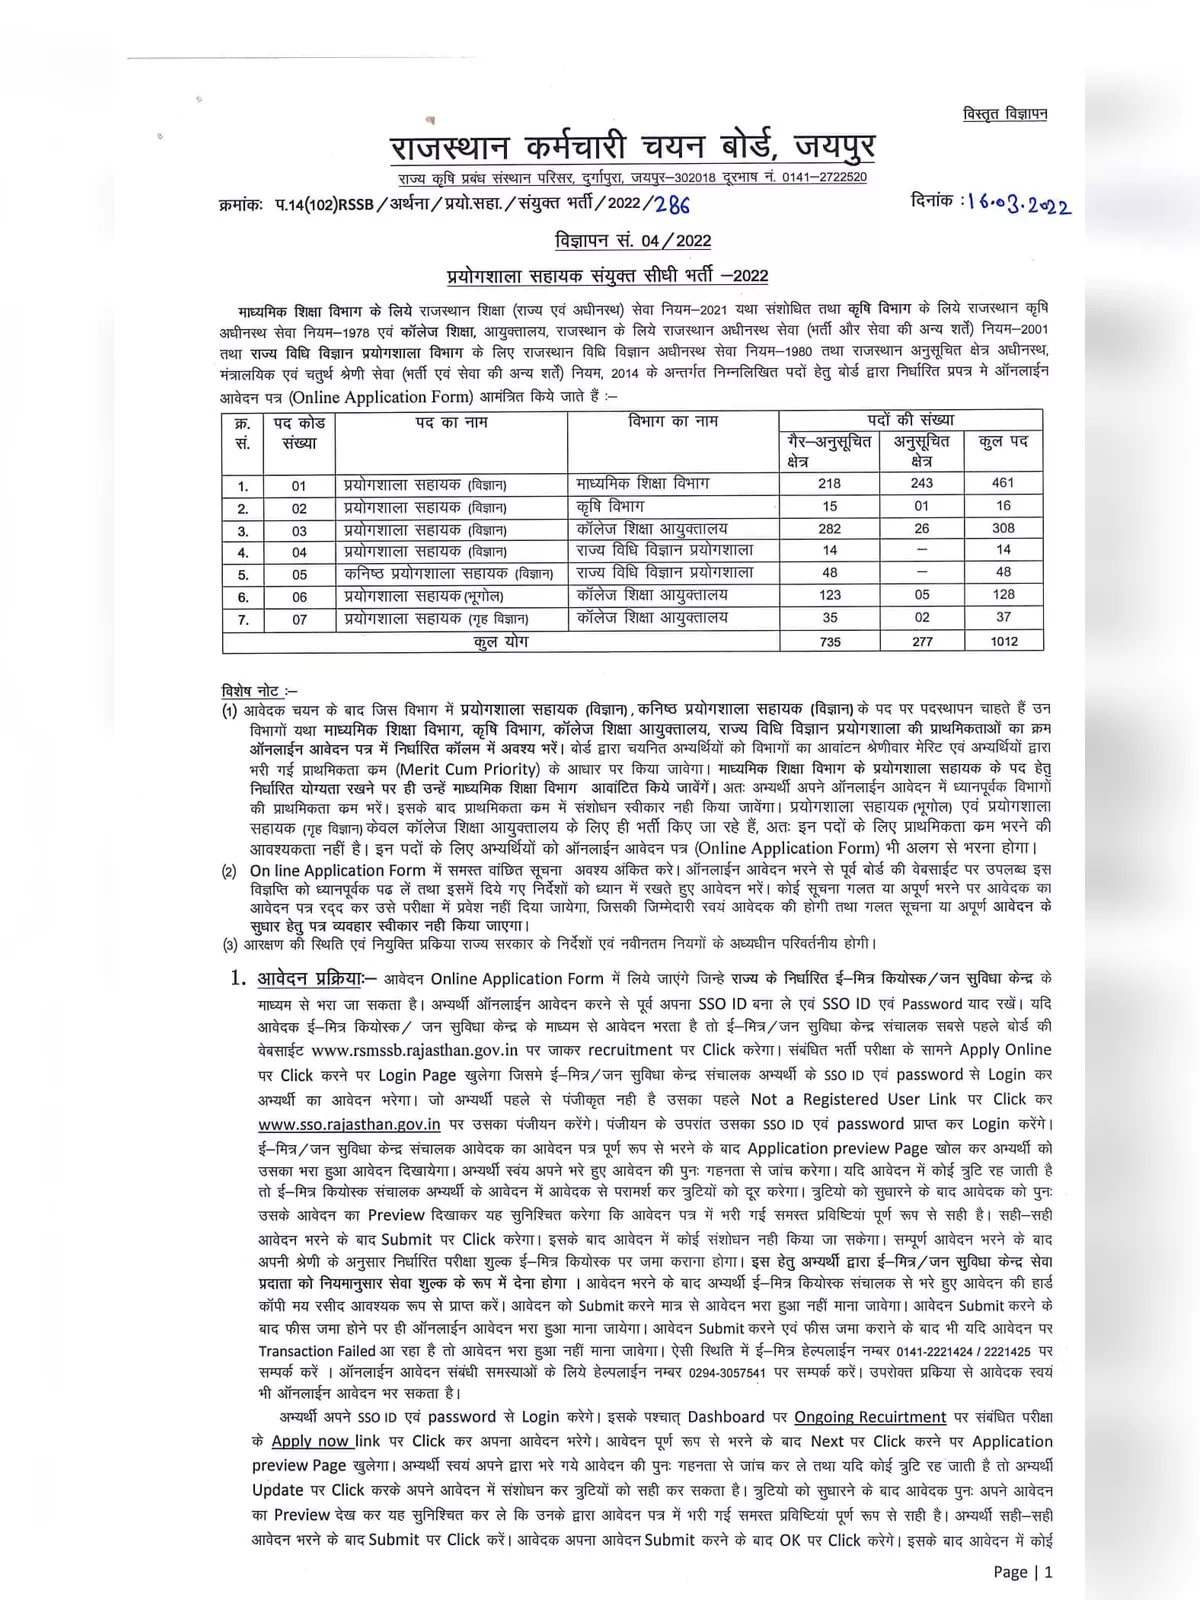 Lab Assistant Notification 2022 Rajasthan